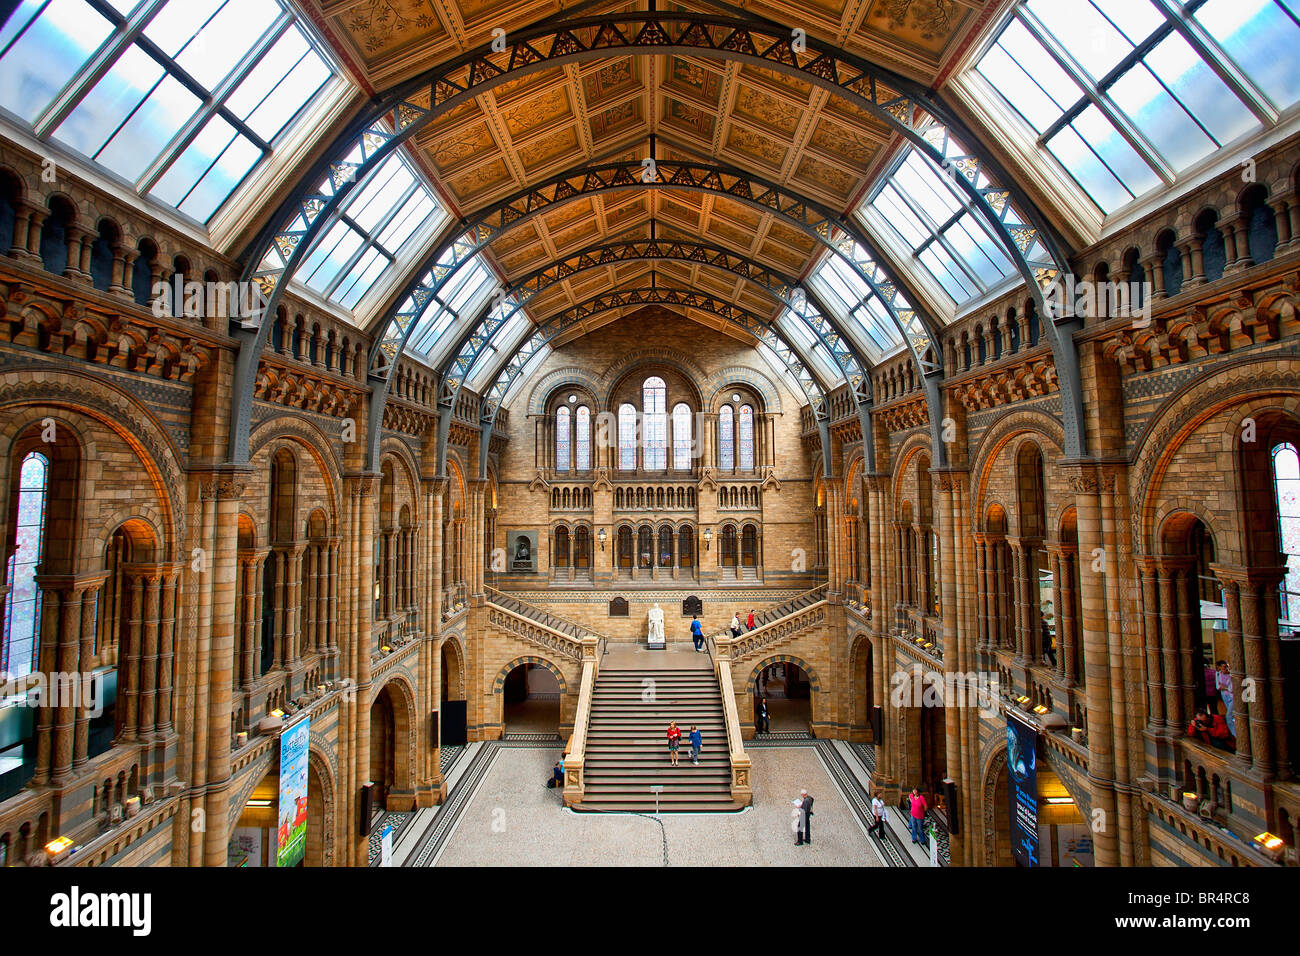 Europa, United Kingdom, England, London, Central Hall of Natural History Museum Stockfoto